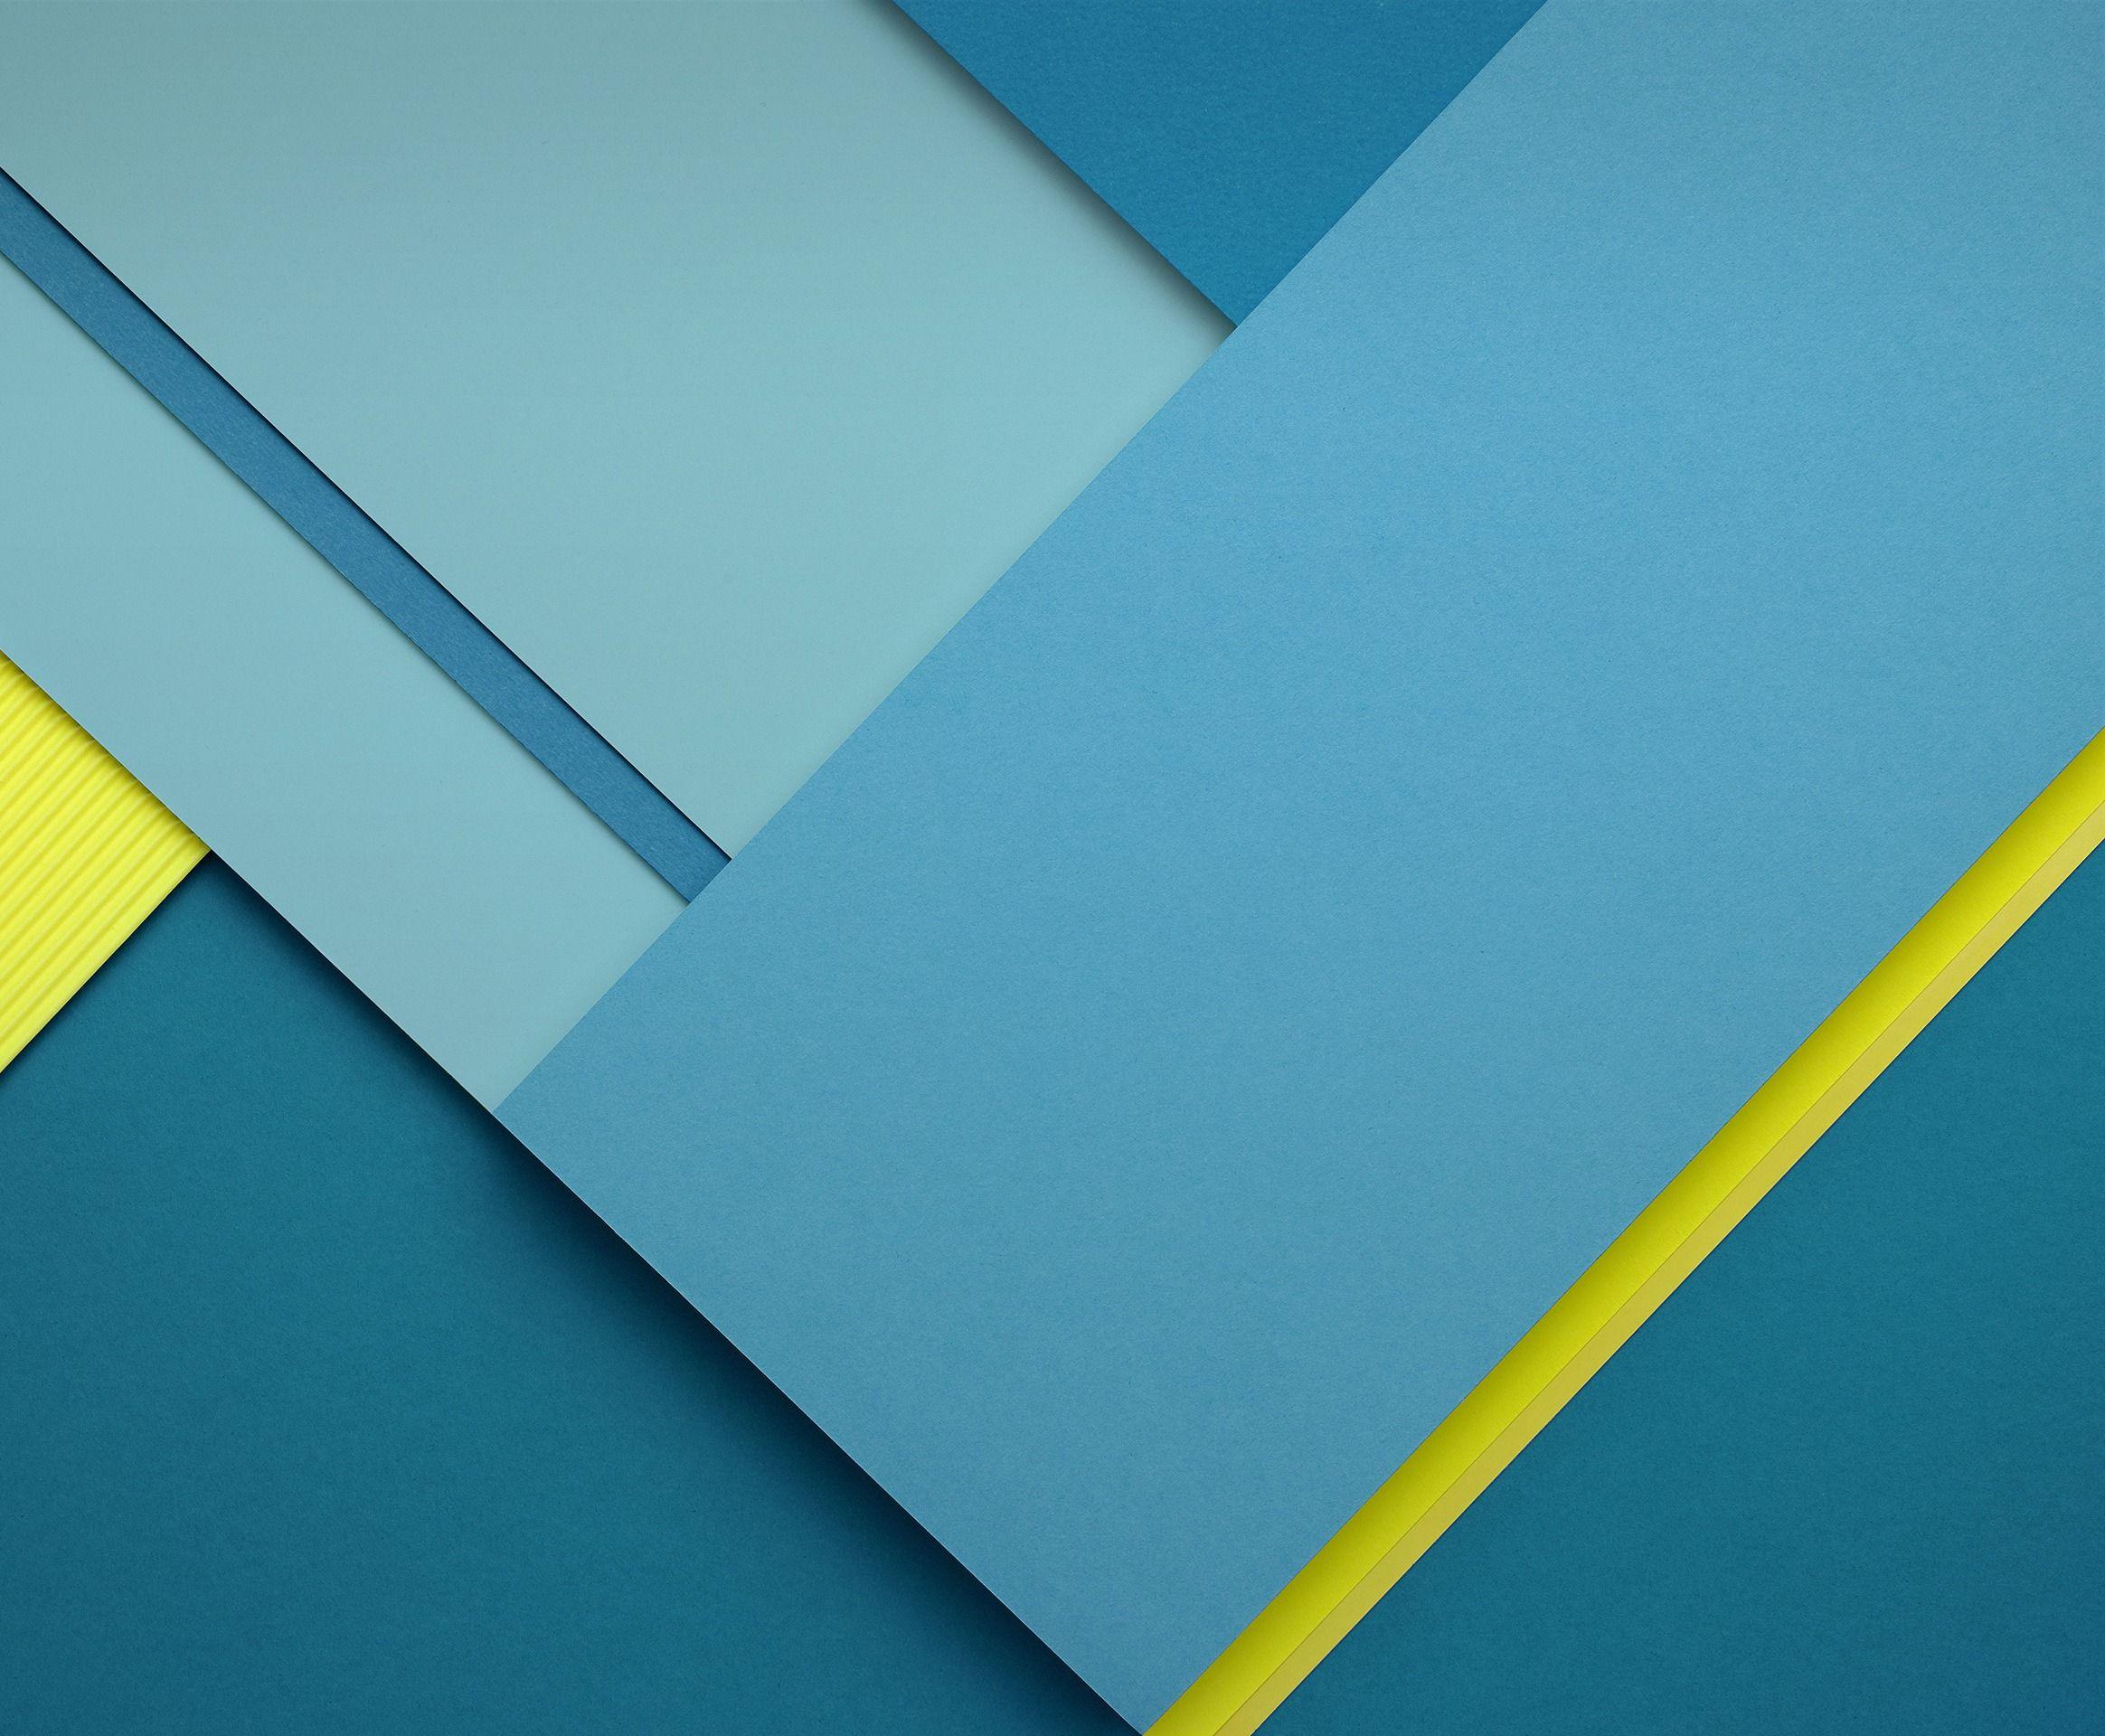 Download: 11 Wallpaper From Android 5.0 Lollipop